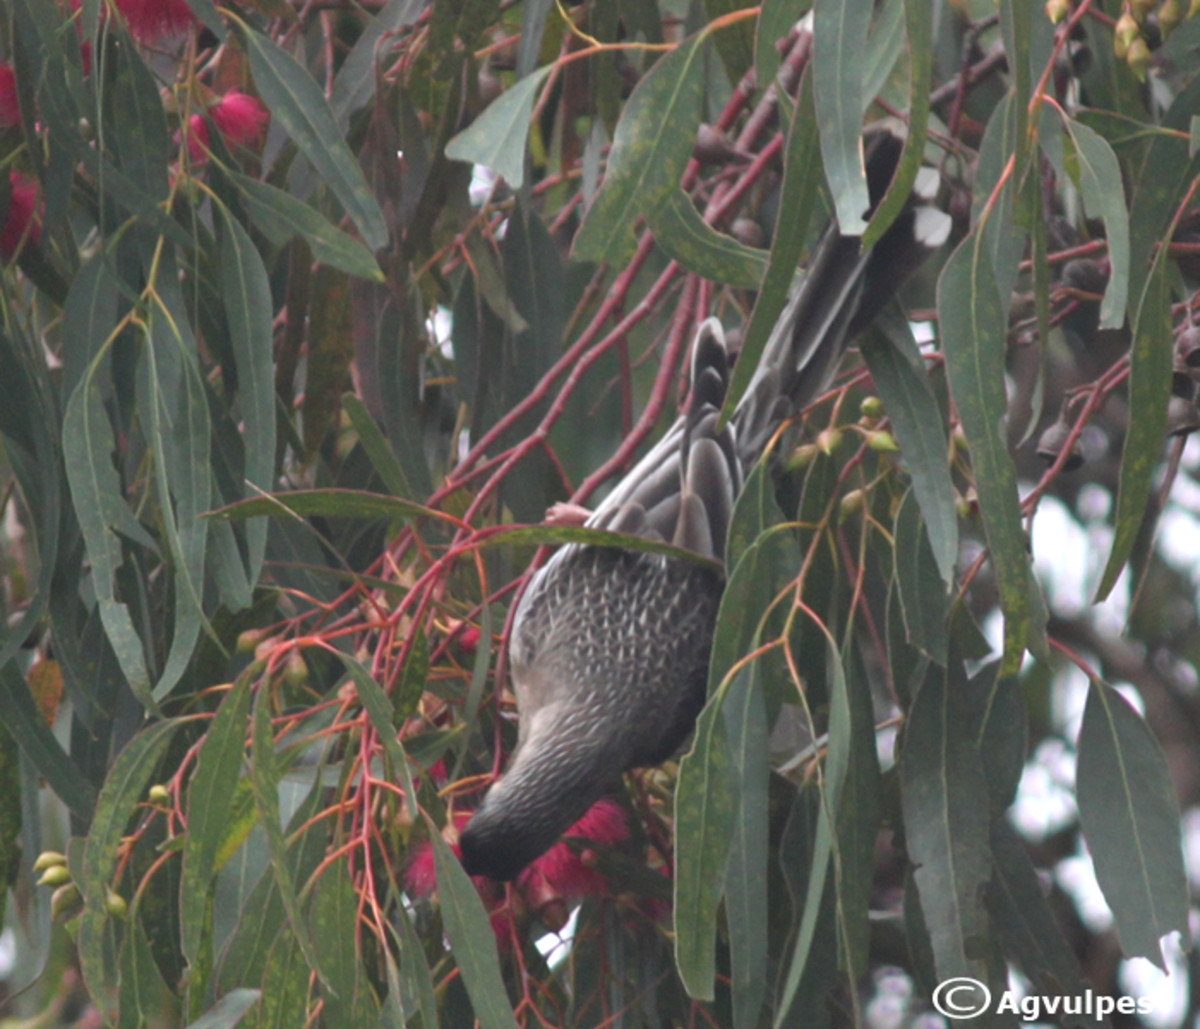 Wattle Birds are great entertainment as they hang about looking for nectar.